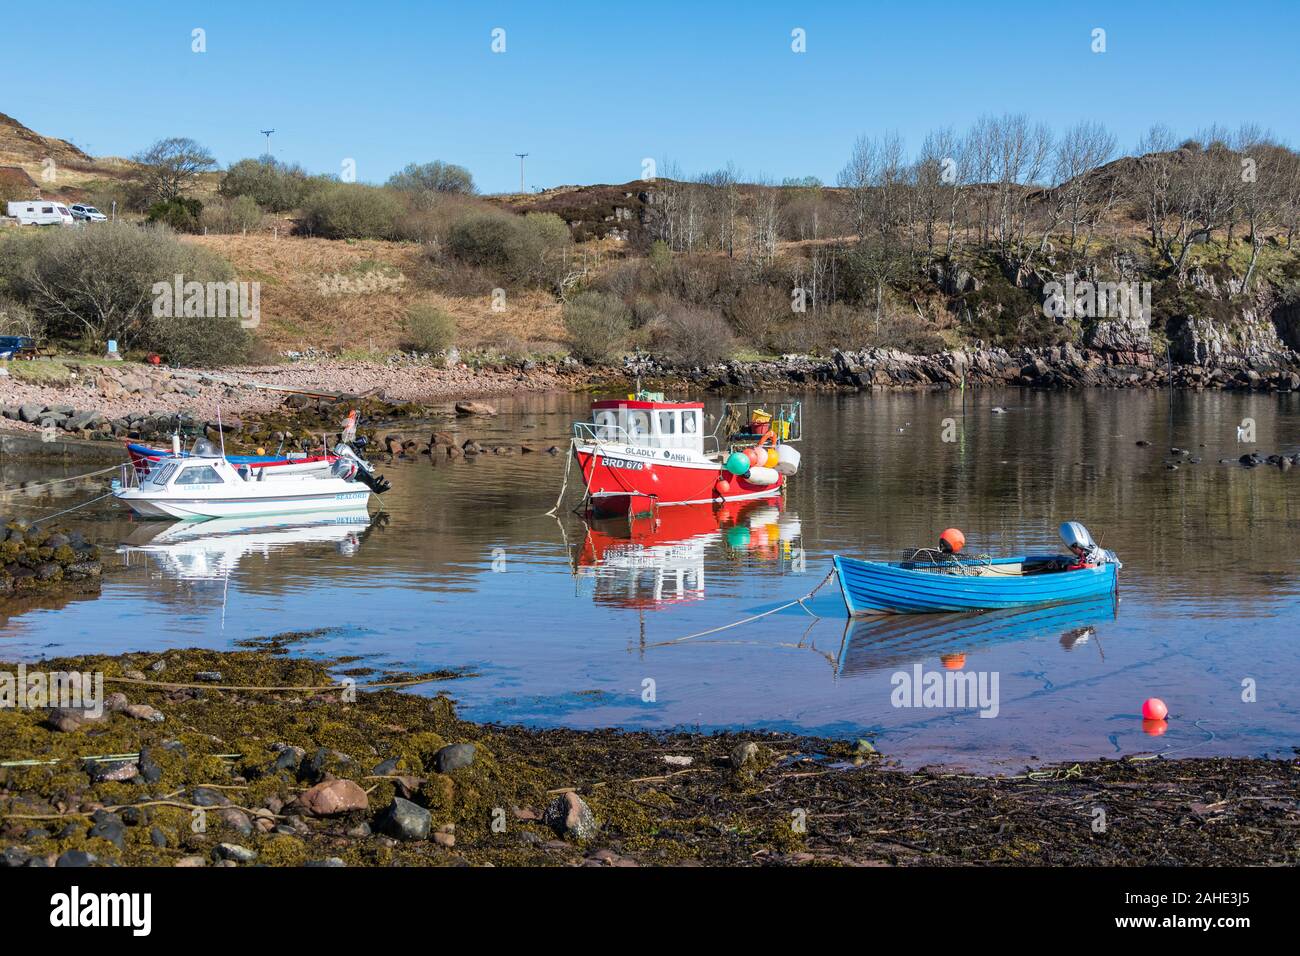 Fishing boats in Cove, located on the northwestern shore of Loch Ewe, Poolewe, Inverasdale, Ross-shire, Scotland. Stock Photo